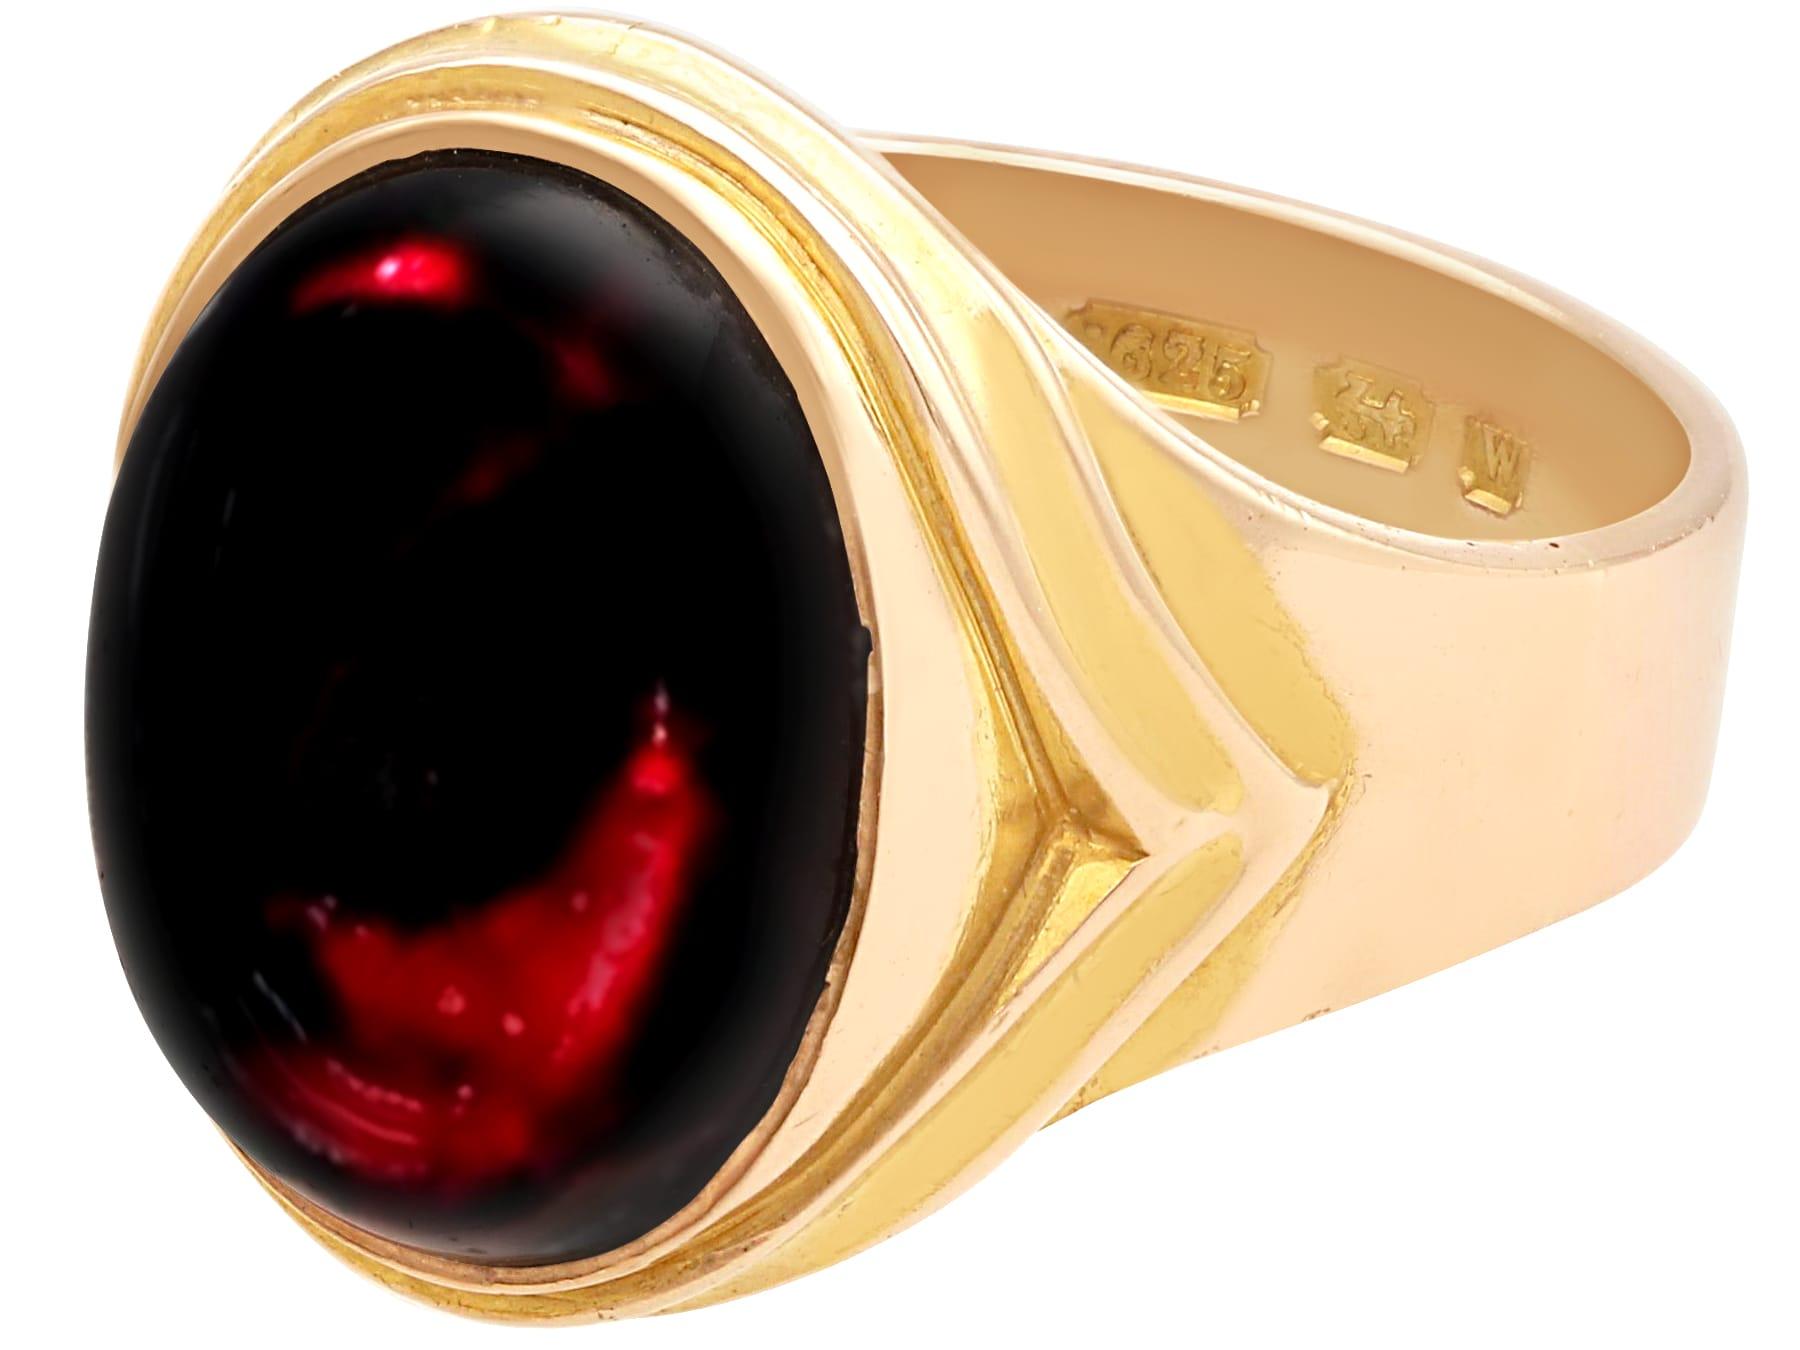 A stunning, fine and impressive 13.96 carat garnet and 15 karat yellow gold signet ring; part of our diverse gemstone jewellery and estate jewelry collections.

This stunning, fine and impressive antique 1920s ring has been crafted in 15k yellow